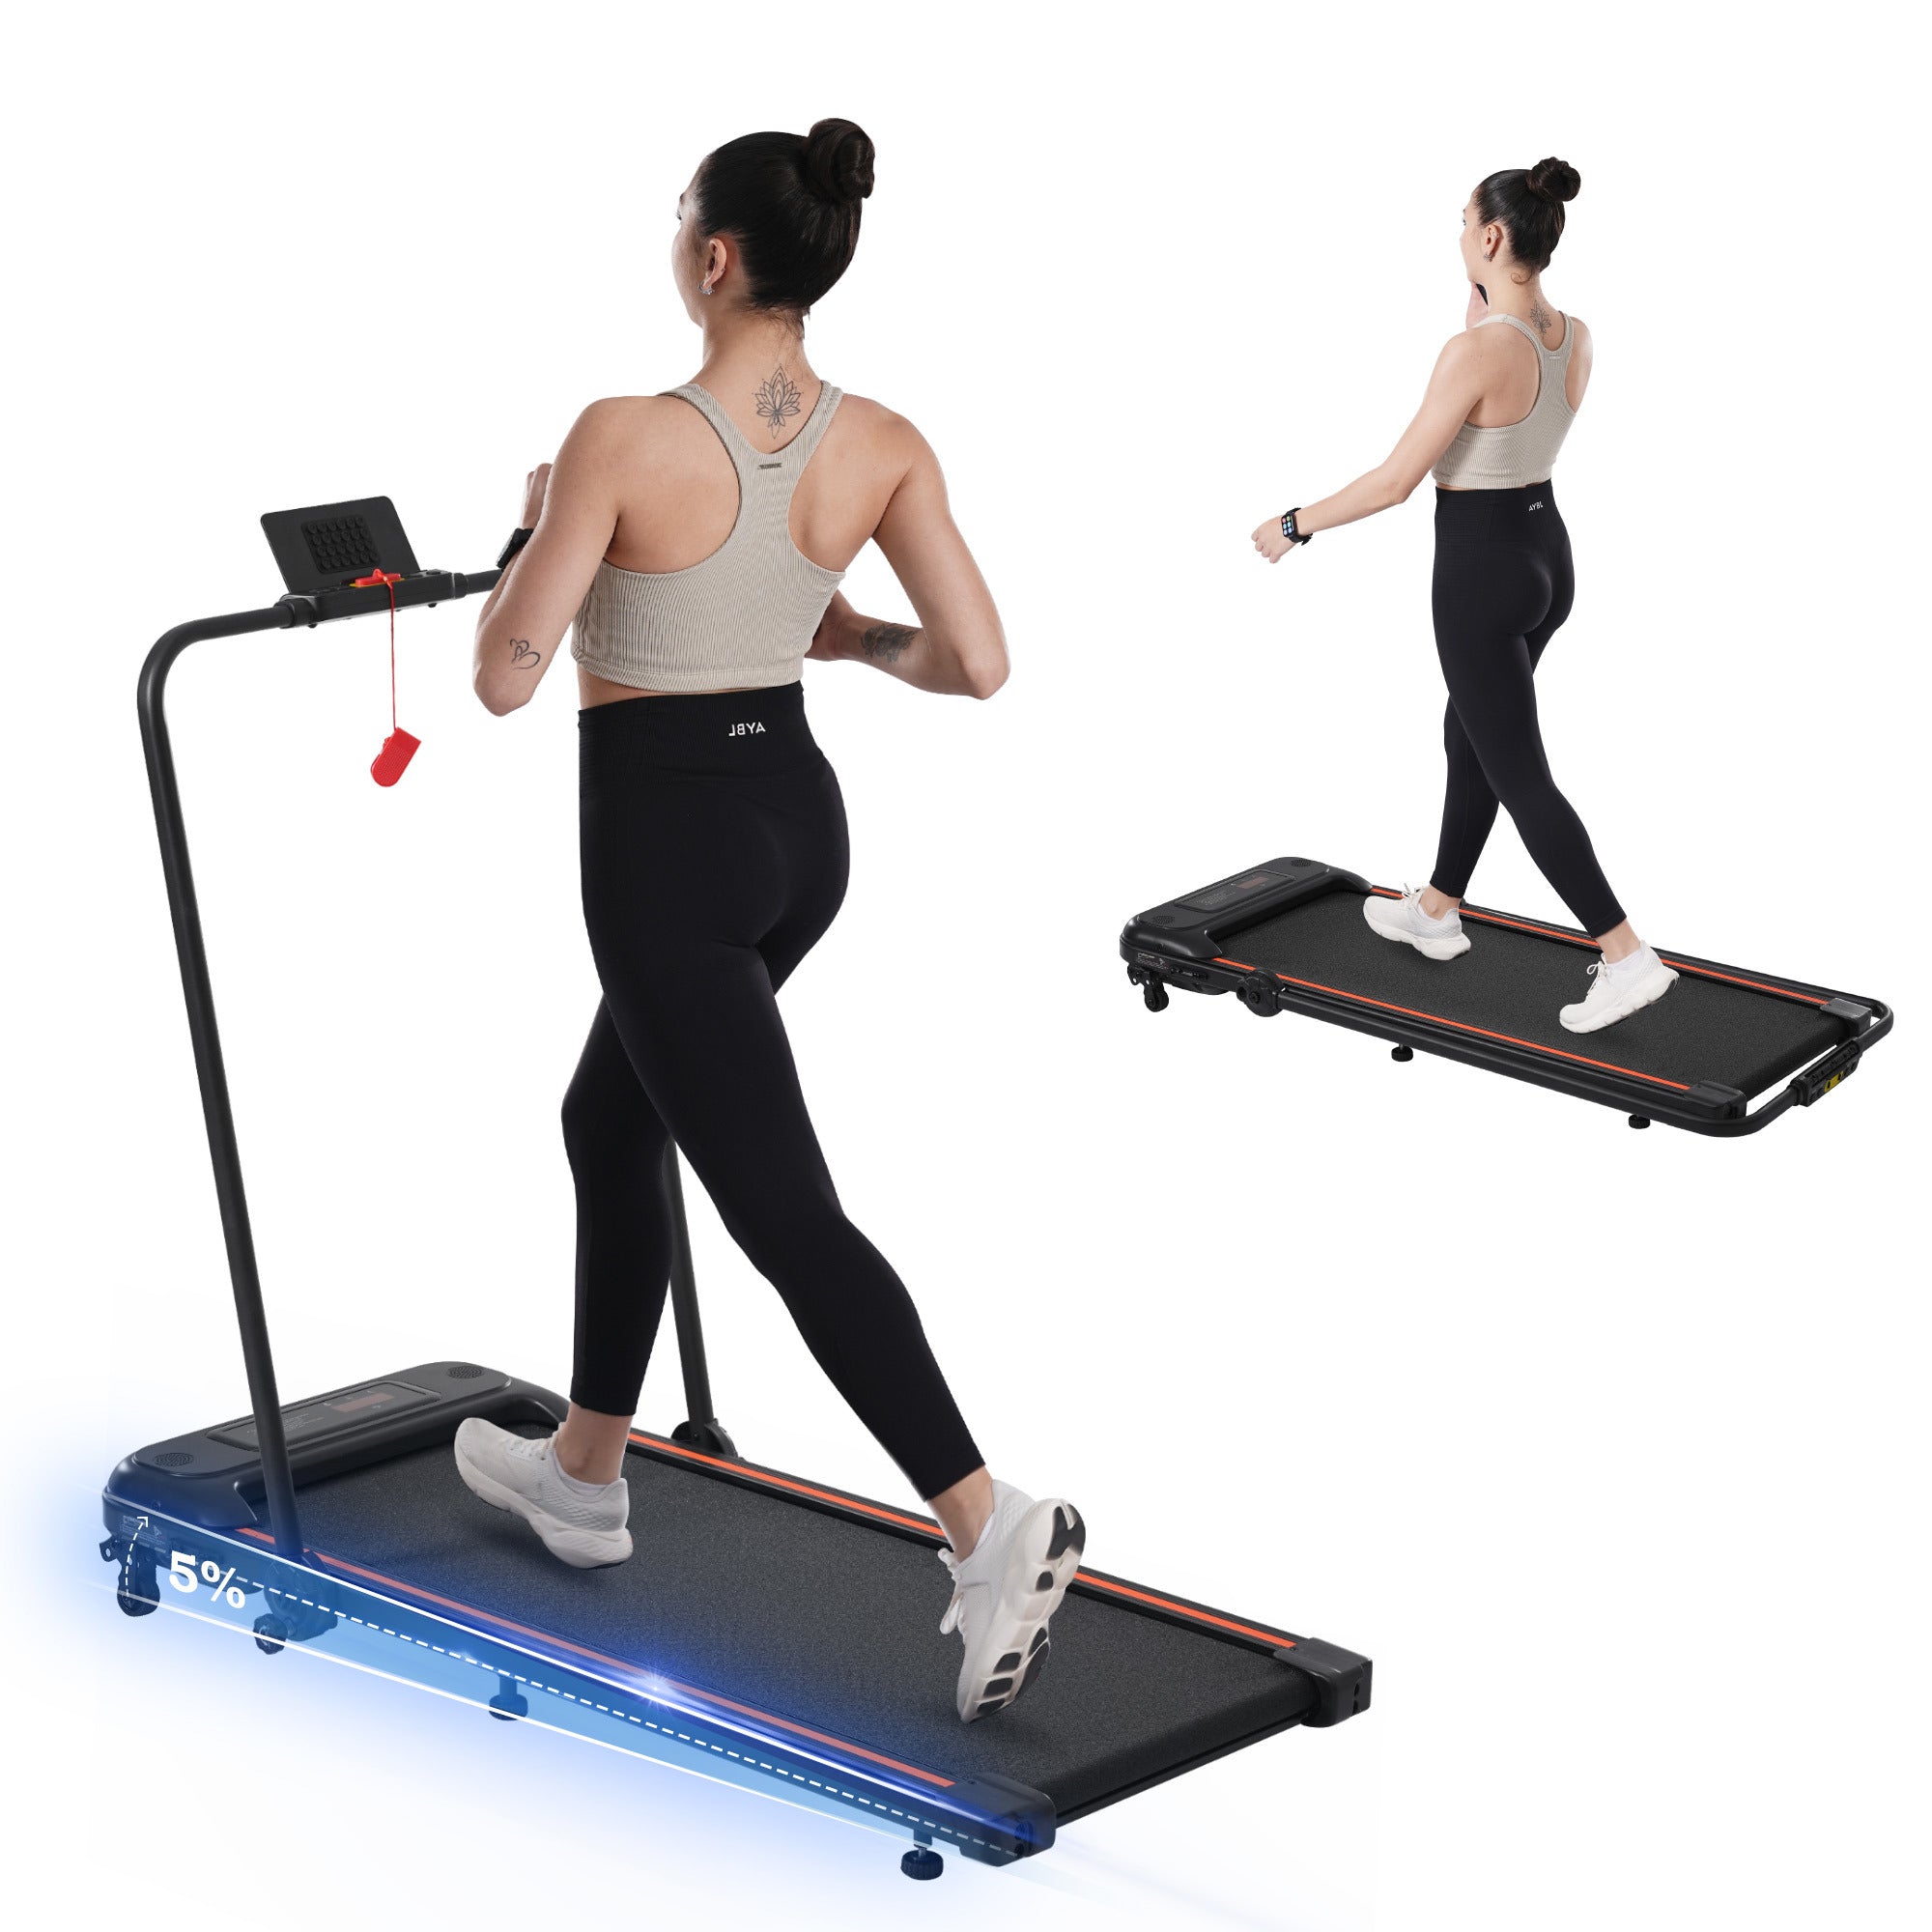 NEW Folding Walking Pad Under Desk Treadmill for Home Office -2.5HP Walking Treadmill With Incline Bluetooth Speaker 0.5-7.5MPH 265LBS Capacity Treadmill for Walking Running - Two Ways to Adjust Speed